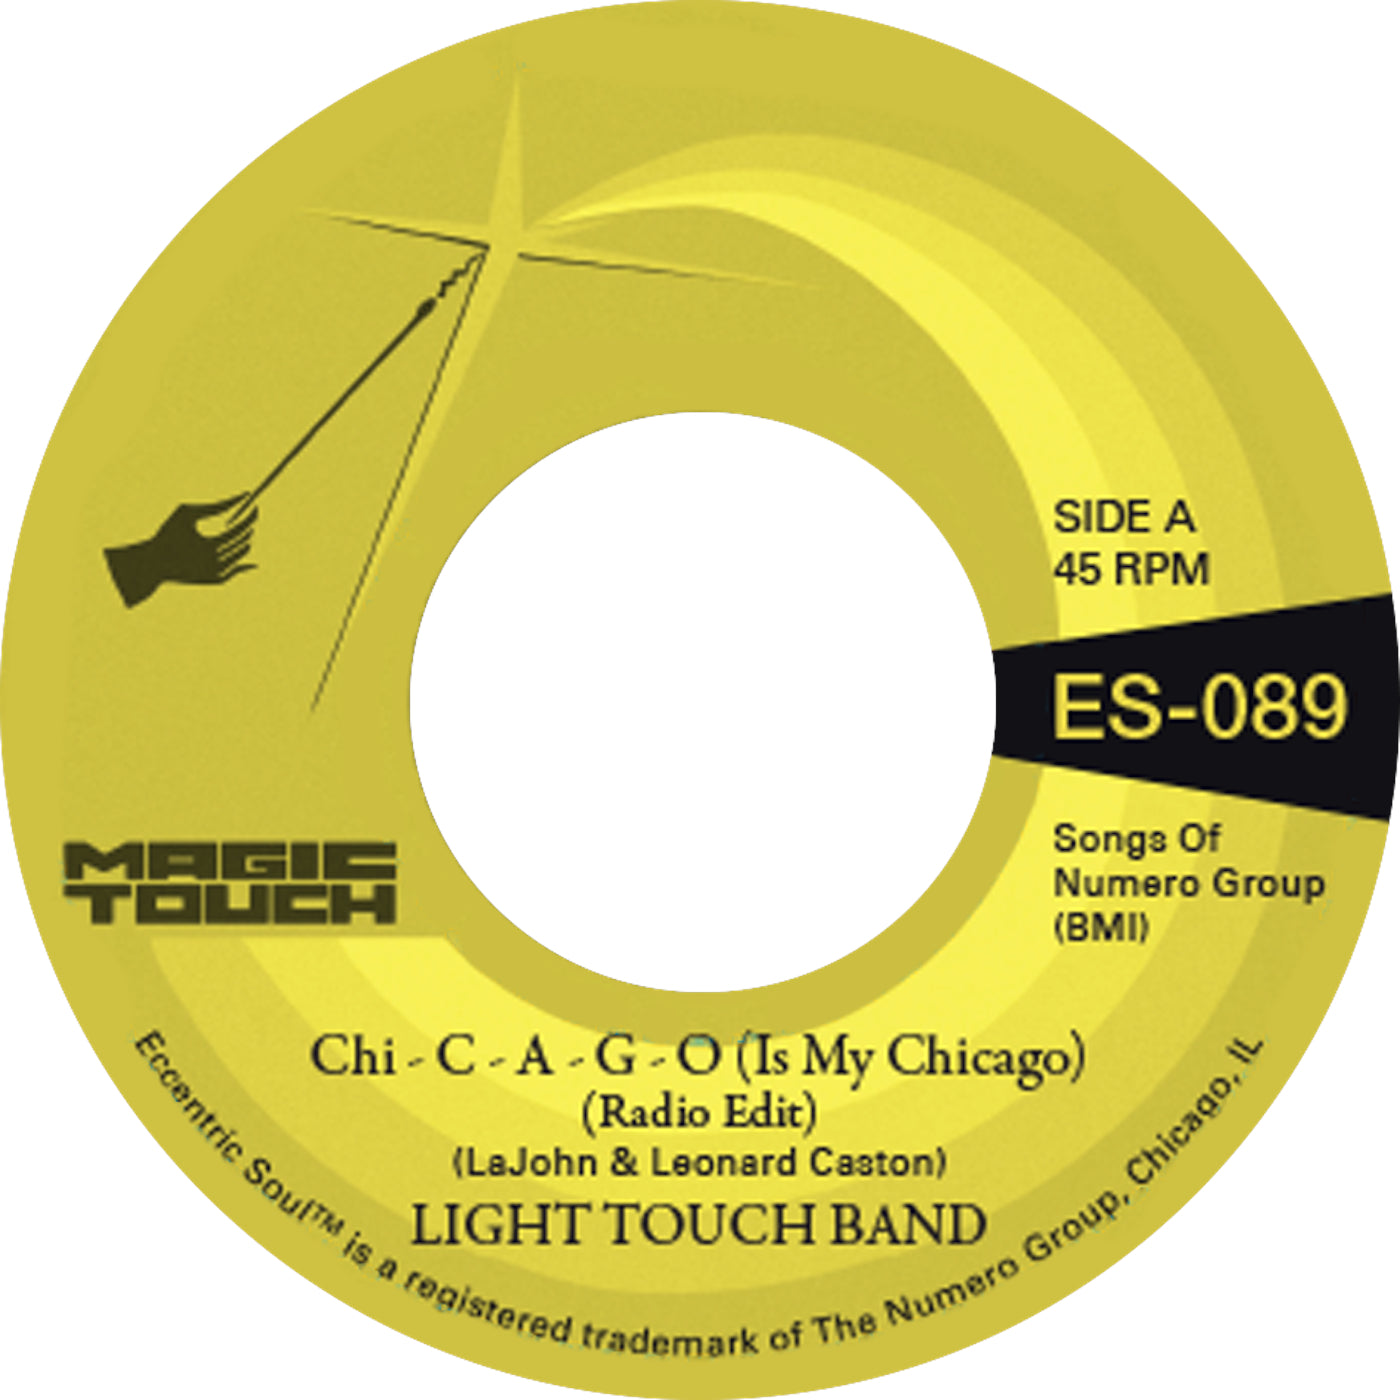 Light Touch Band & Magic Touch - Chi - C - A - G - O (Is My Chicago) b/w Sexy Lady (Radio Edit) [Clear Yellow Vinyl] [7"]